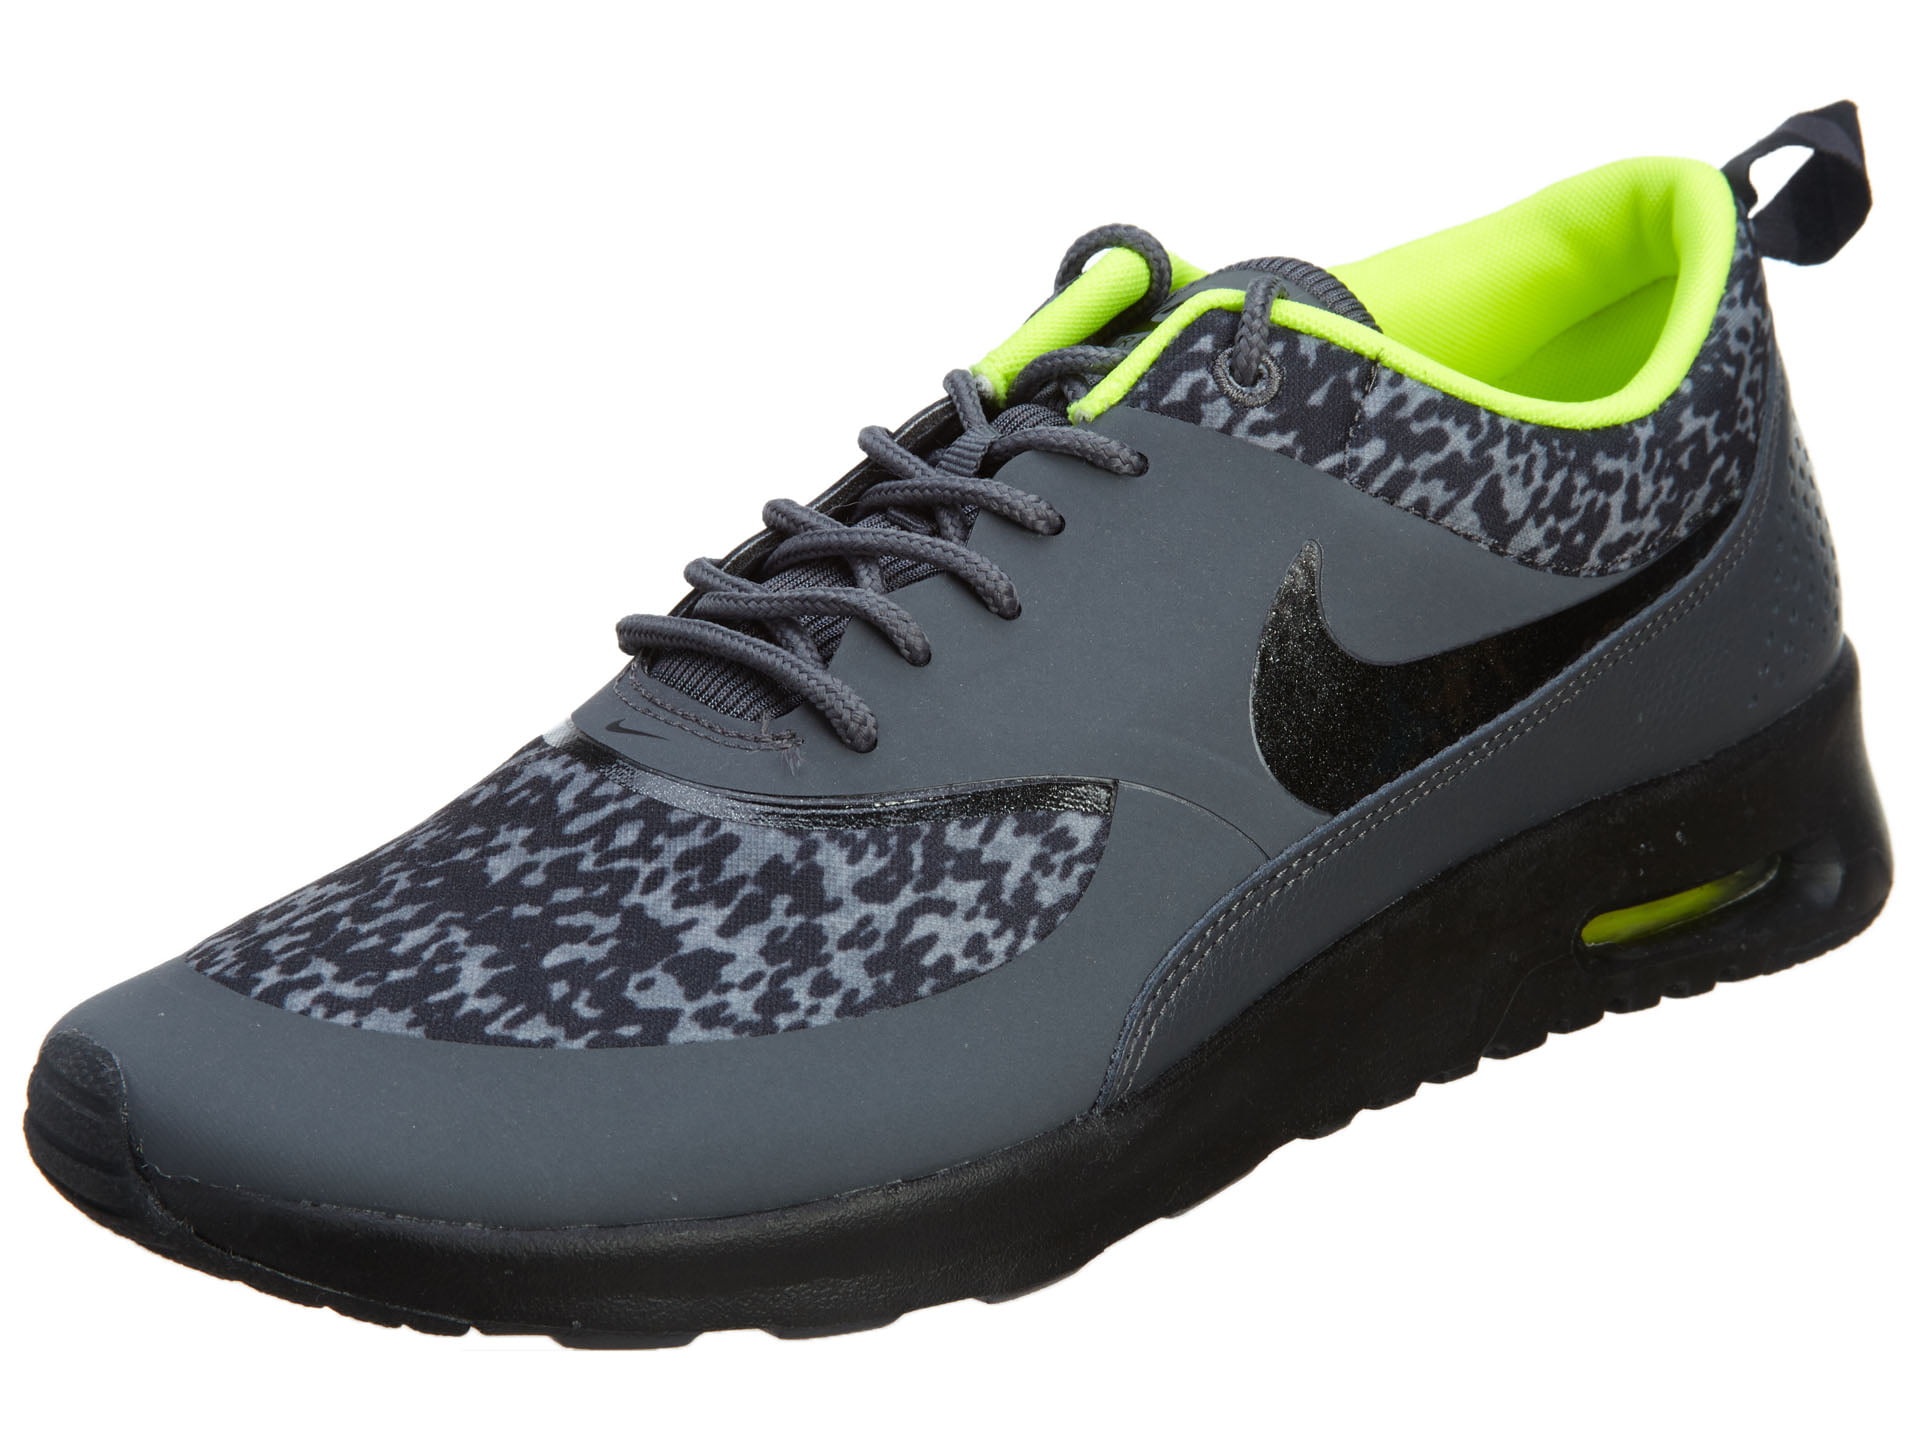 nike air max thea shoes blue spark anthracite